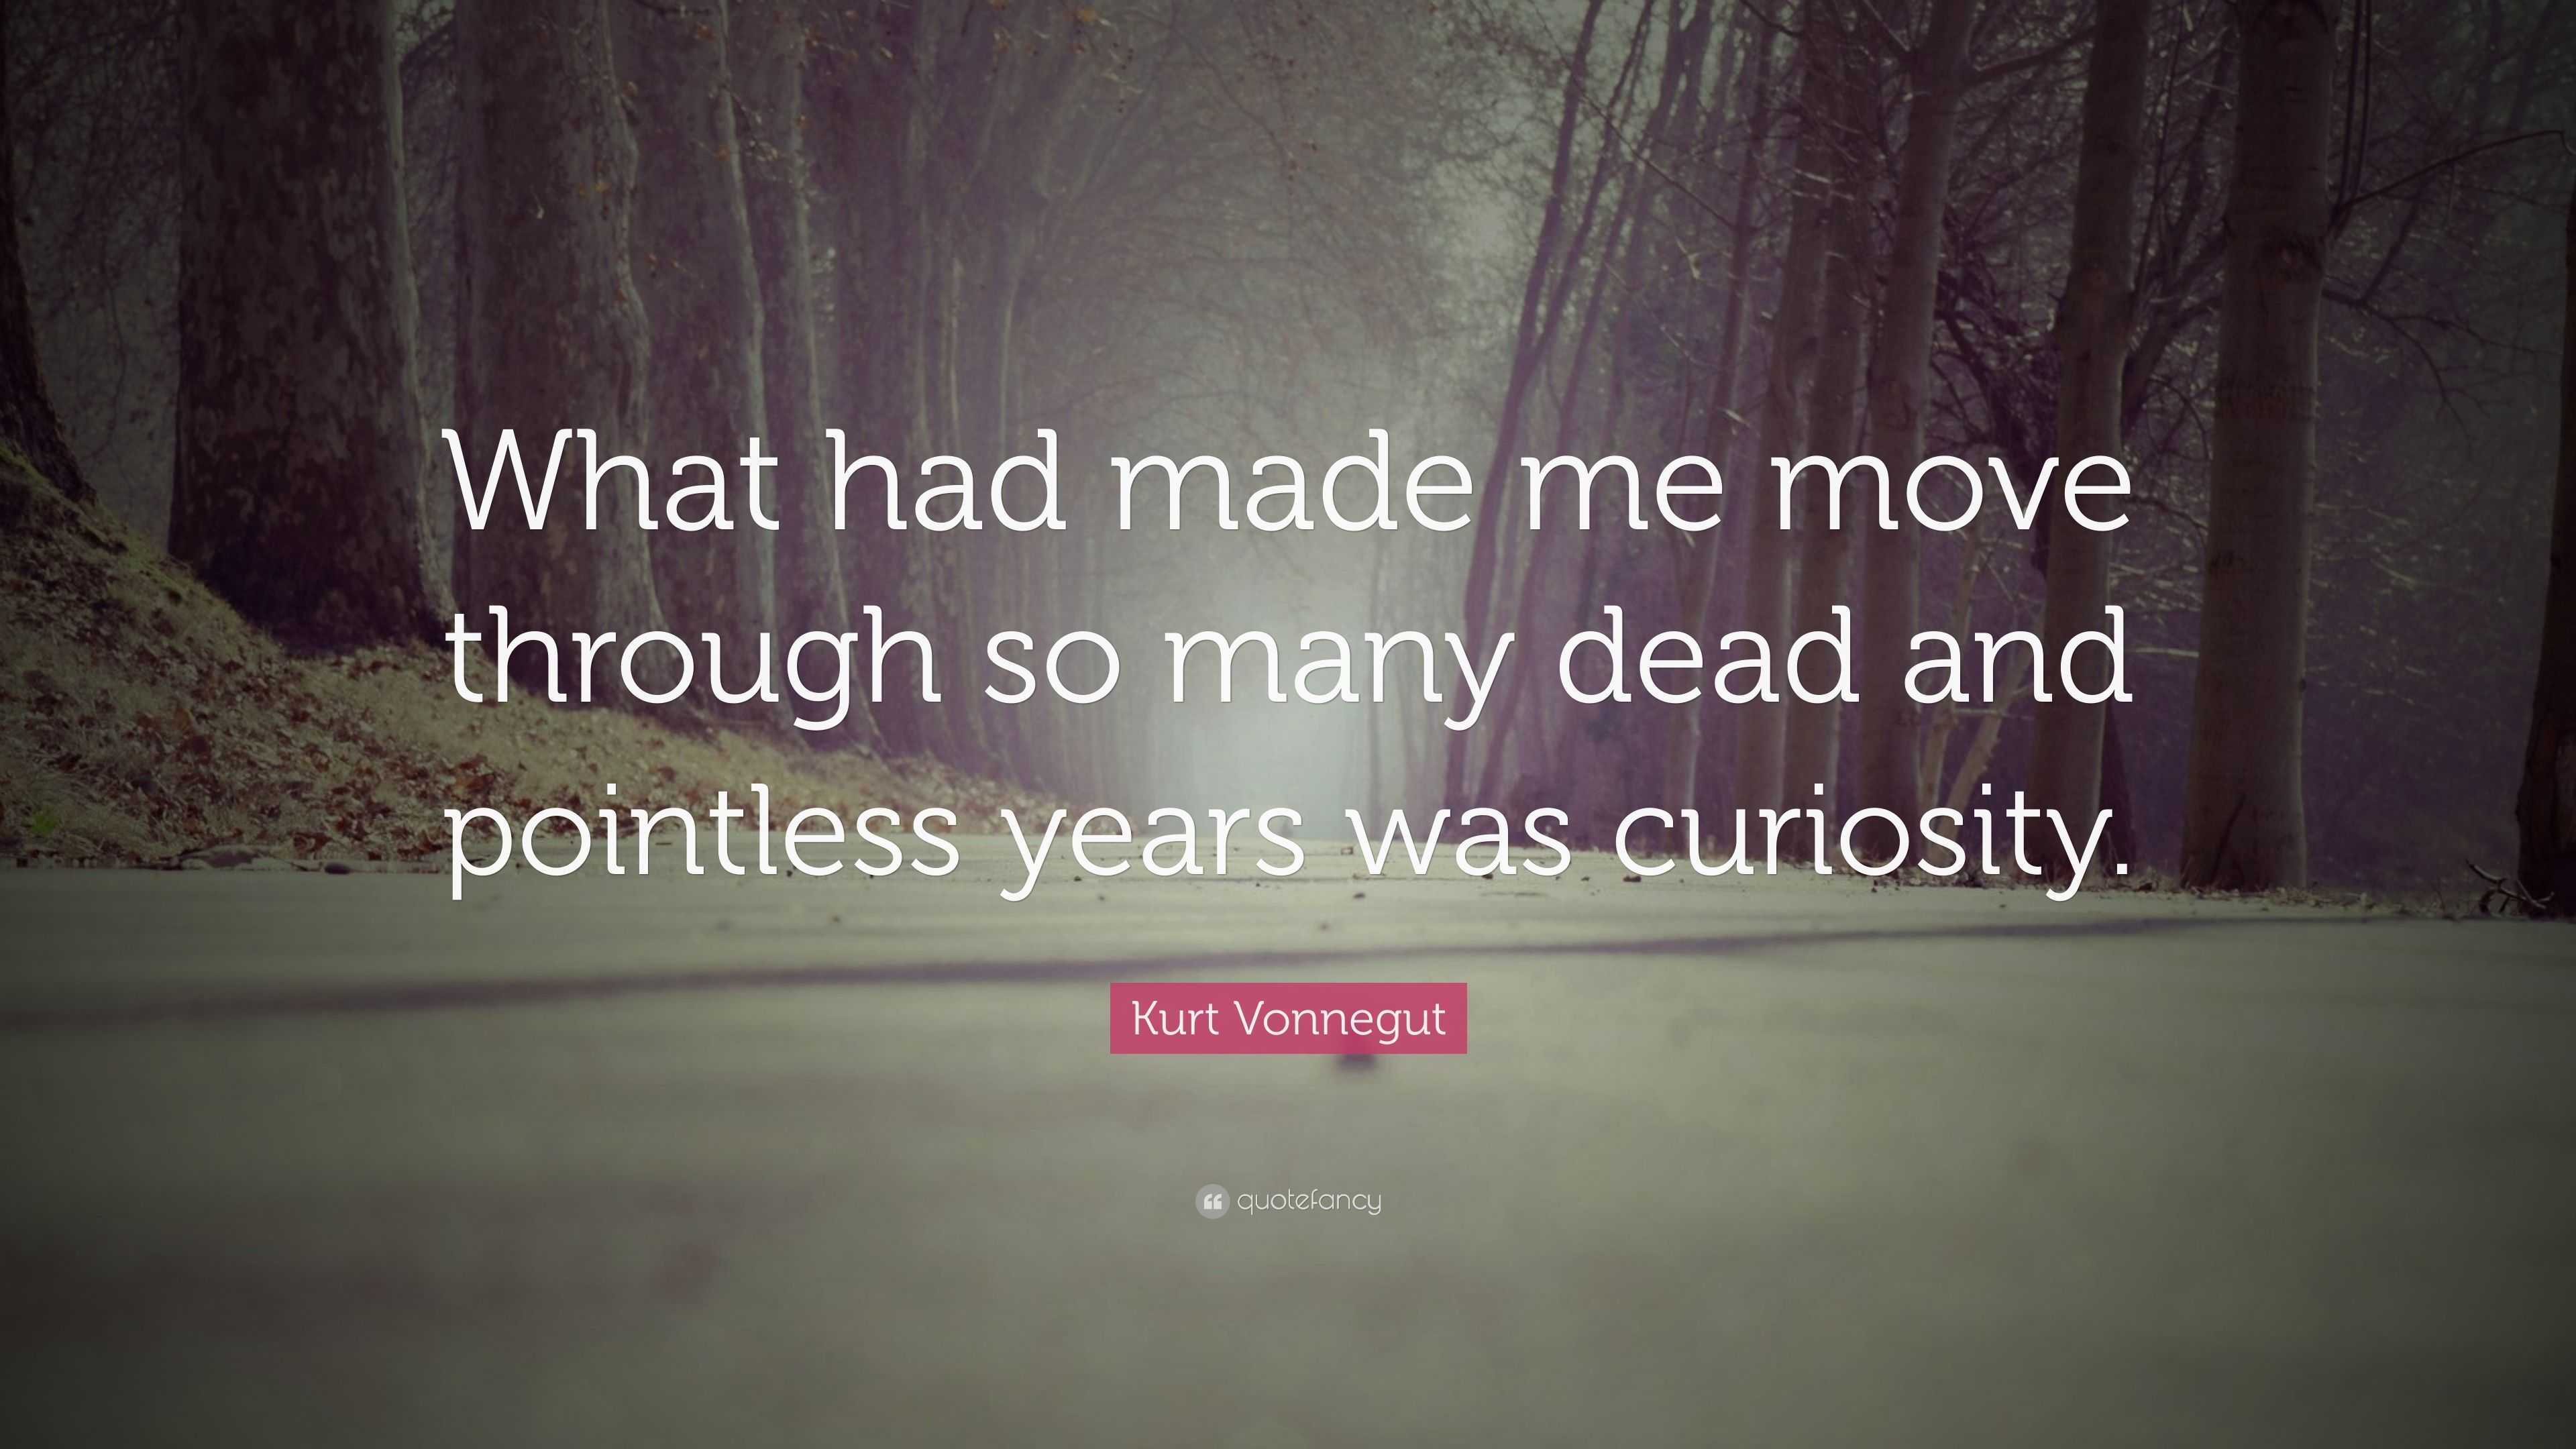 Kurt Vonnegut Quote: “What had made me move through so many dead and ...